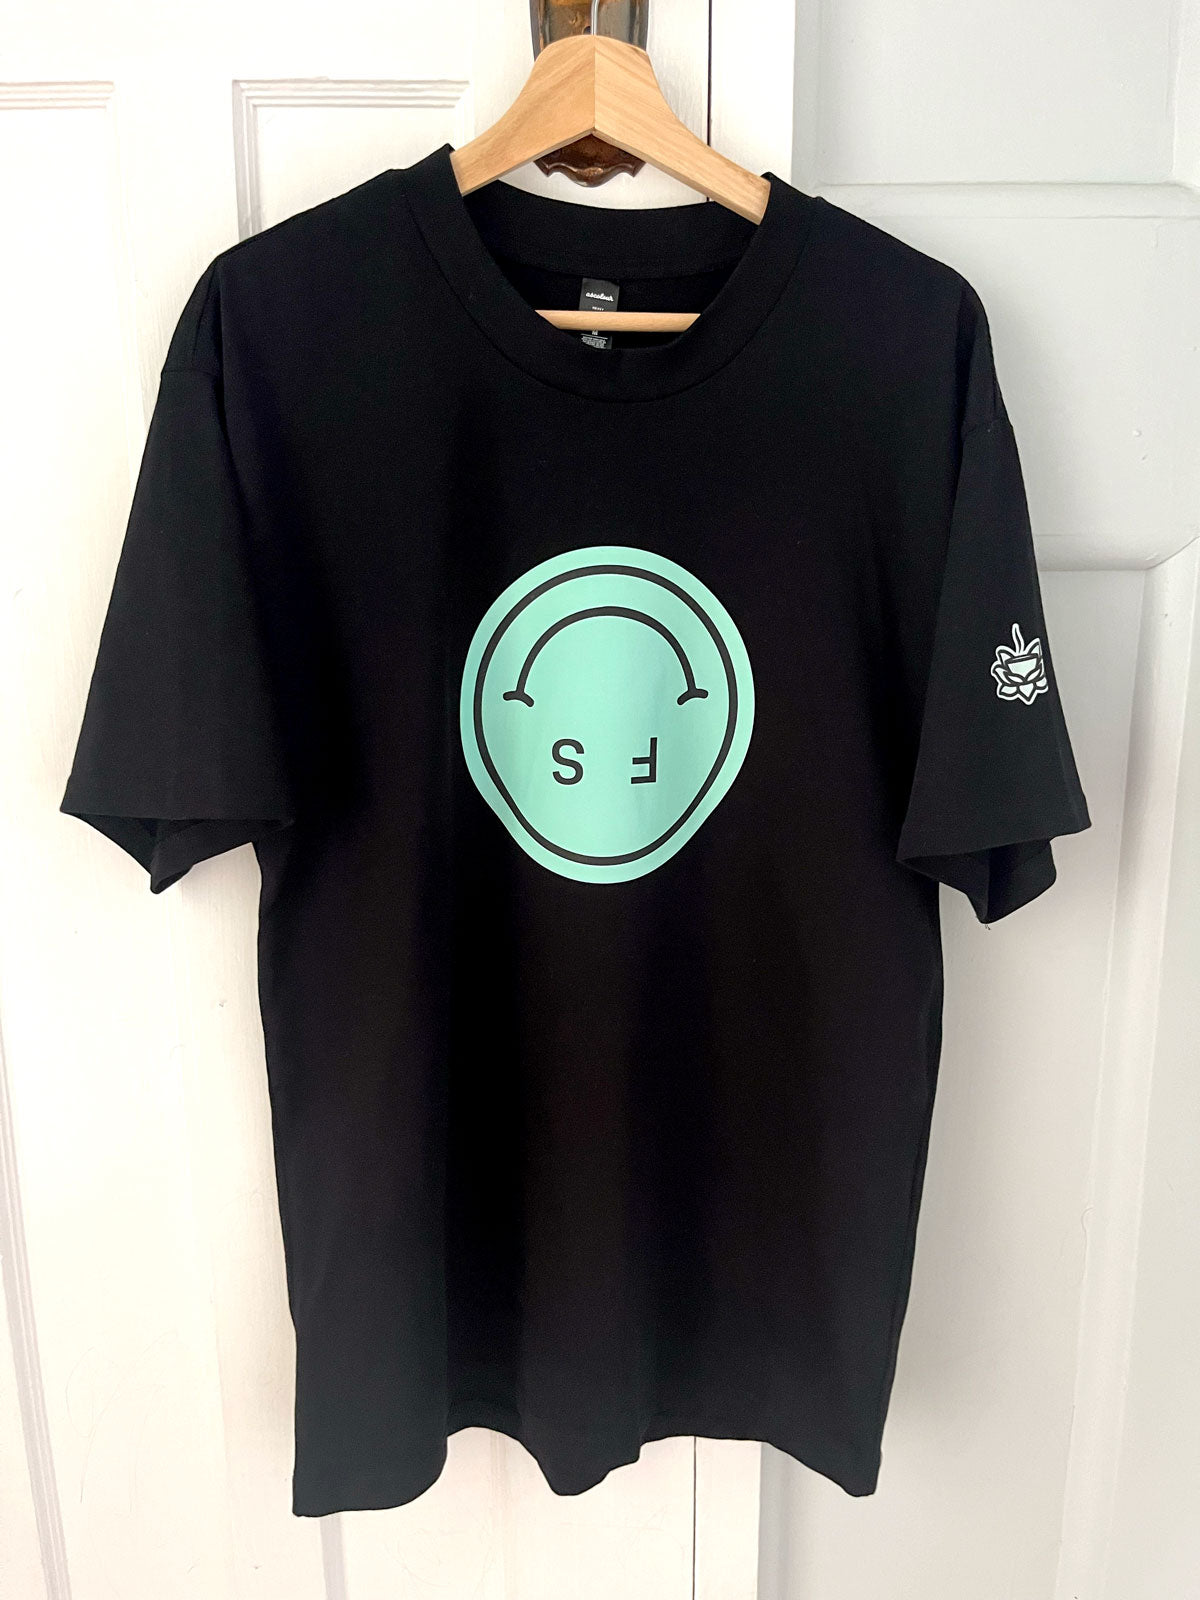 Black t-shirt with green printed smiley face on it